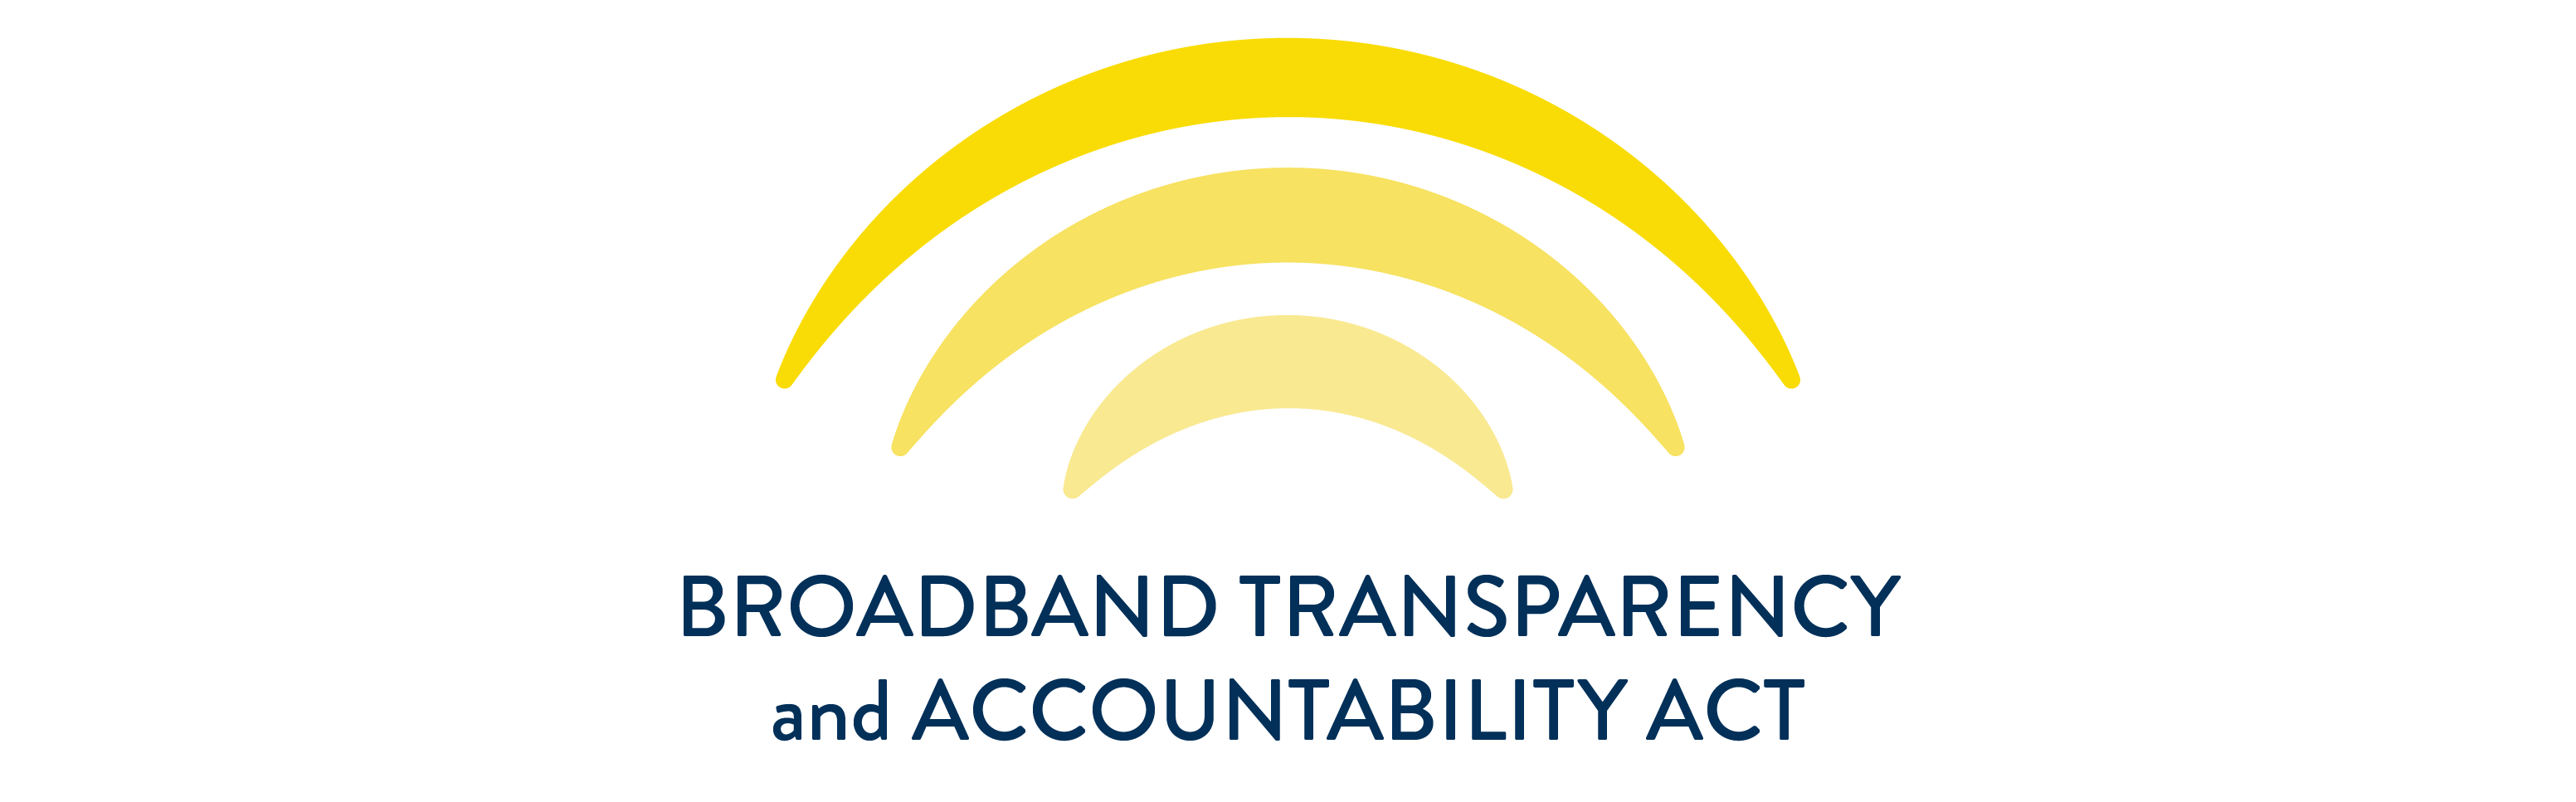 Broadband Transparency and Accountability Act 